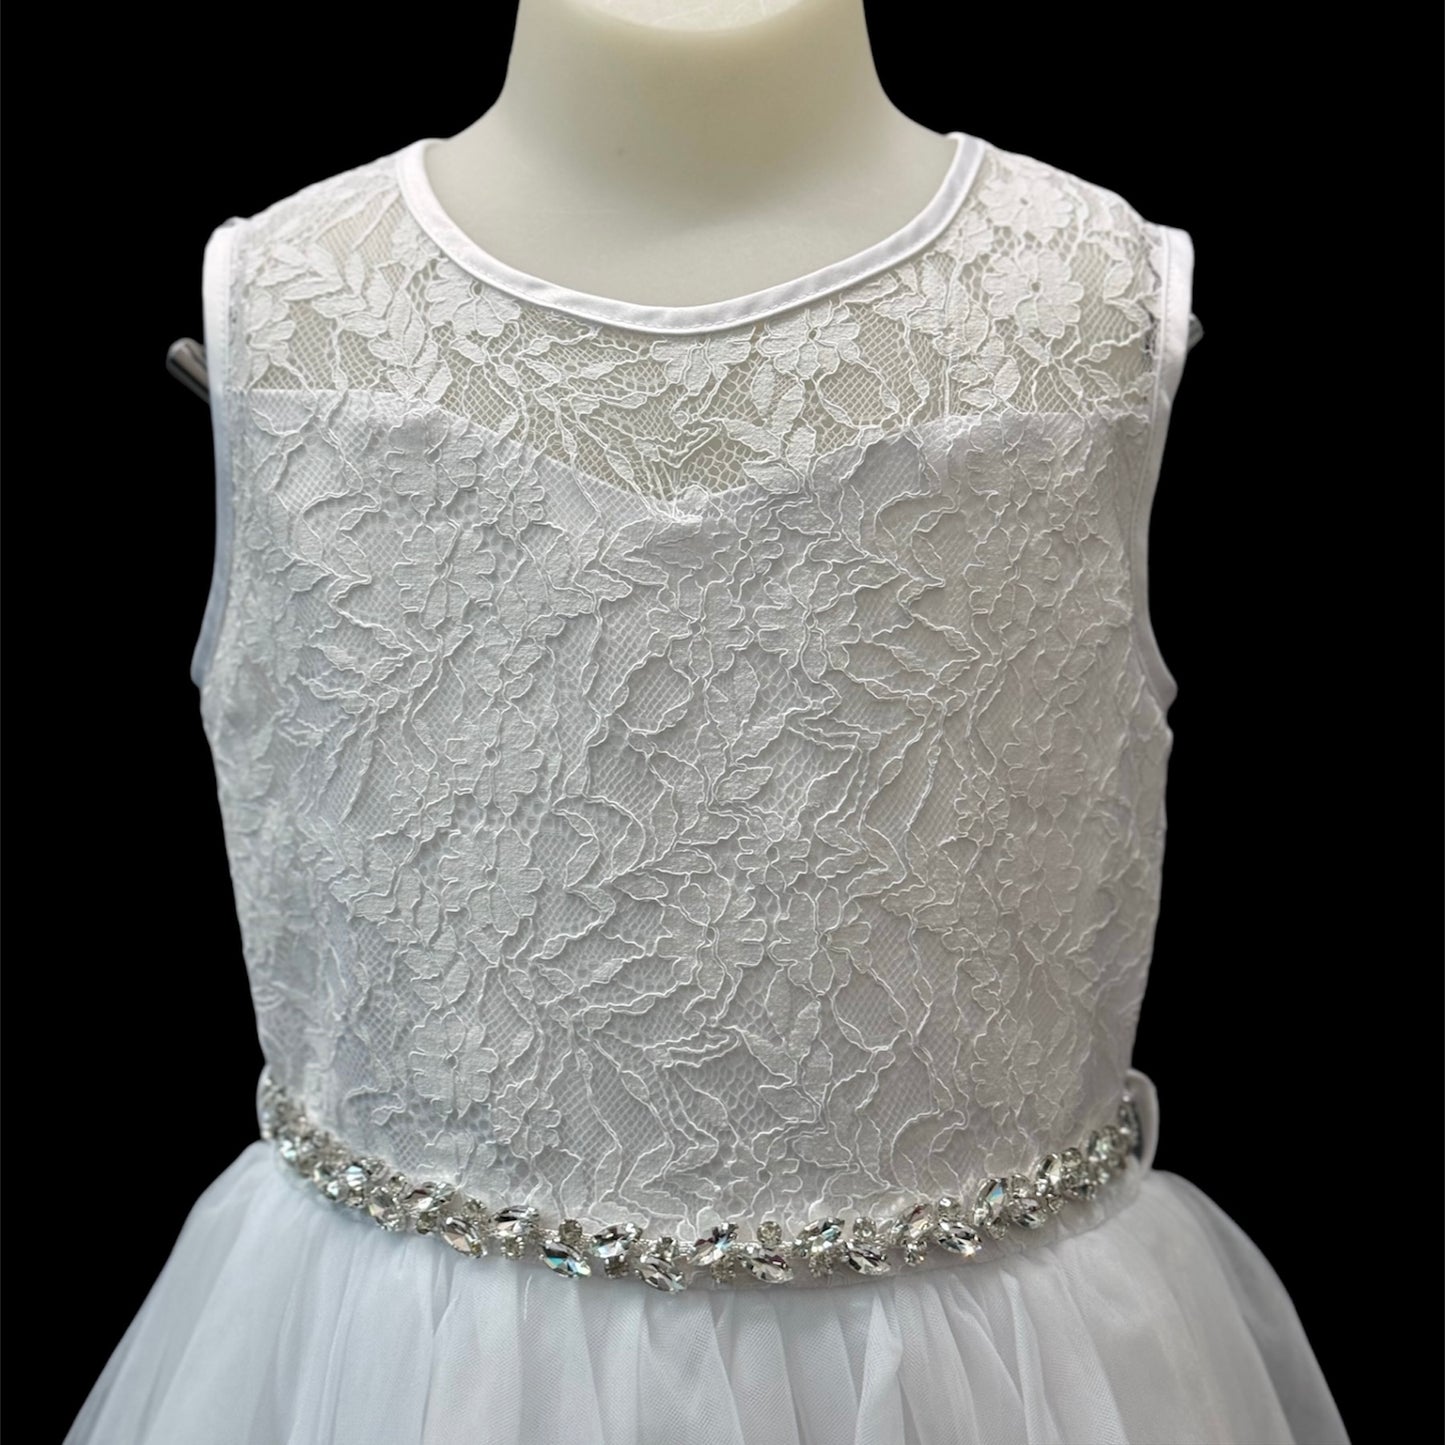 White Sleeveless Dress w/ Floral Lace Bodice